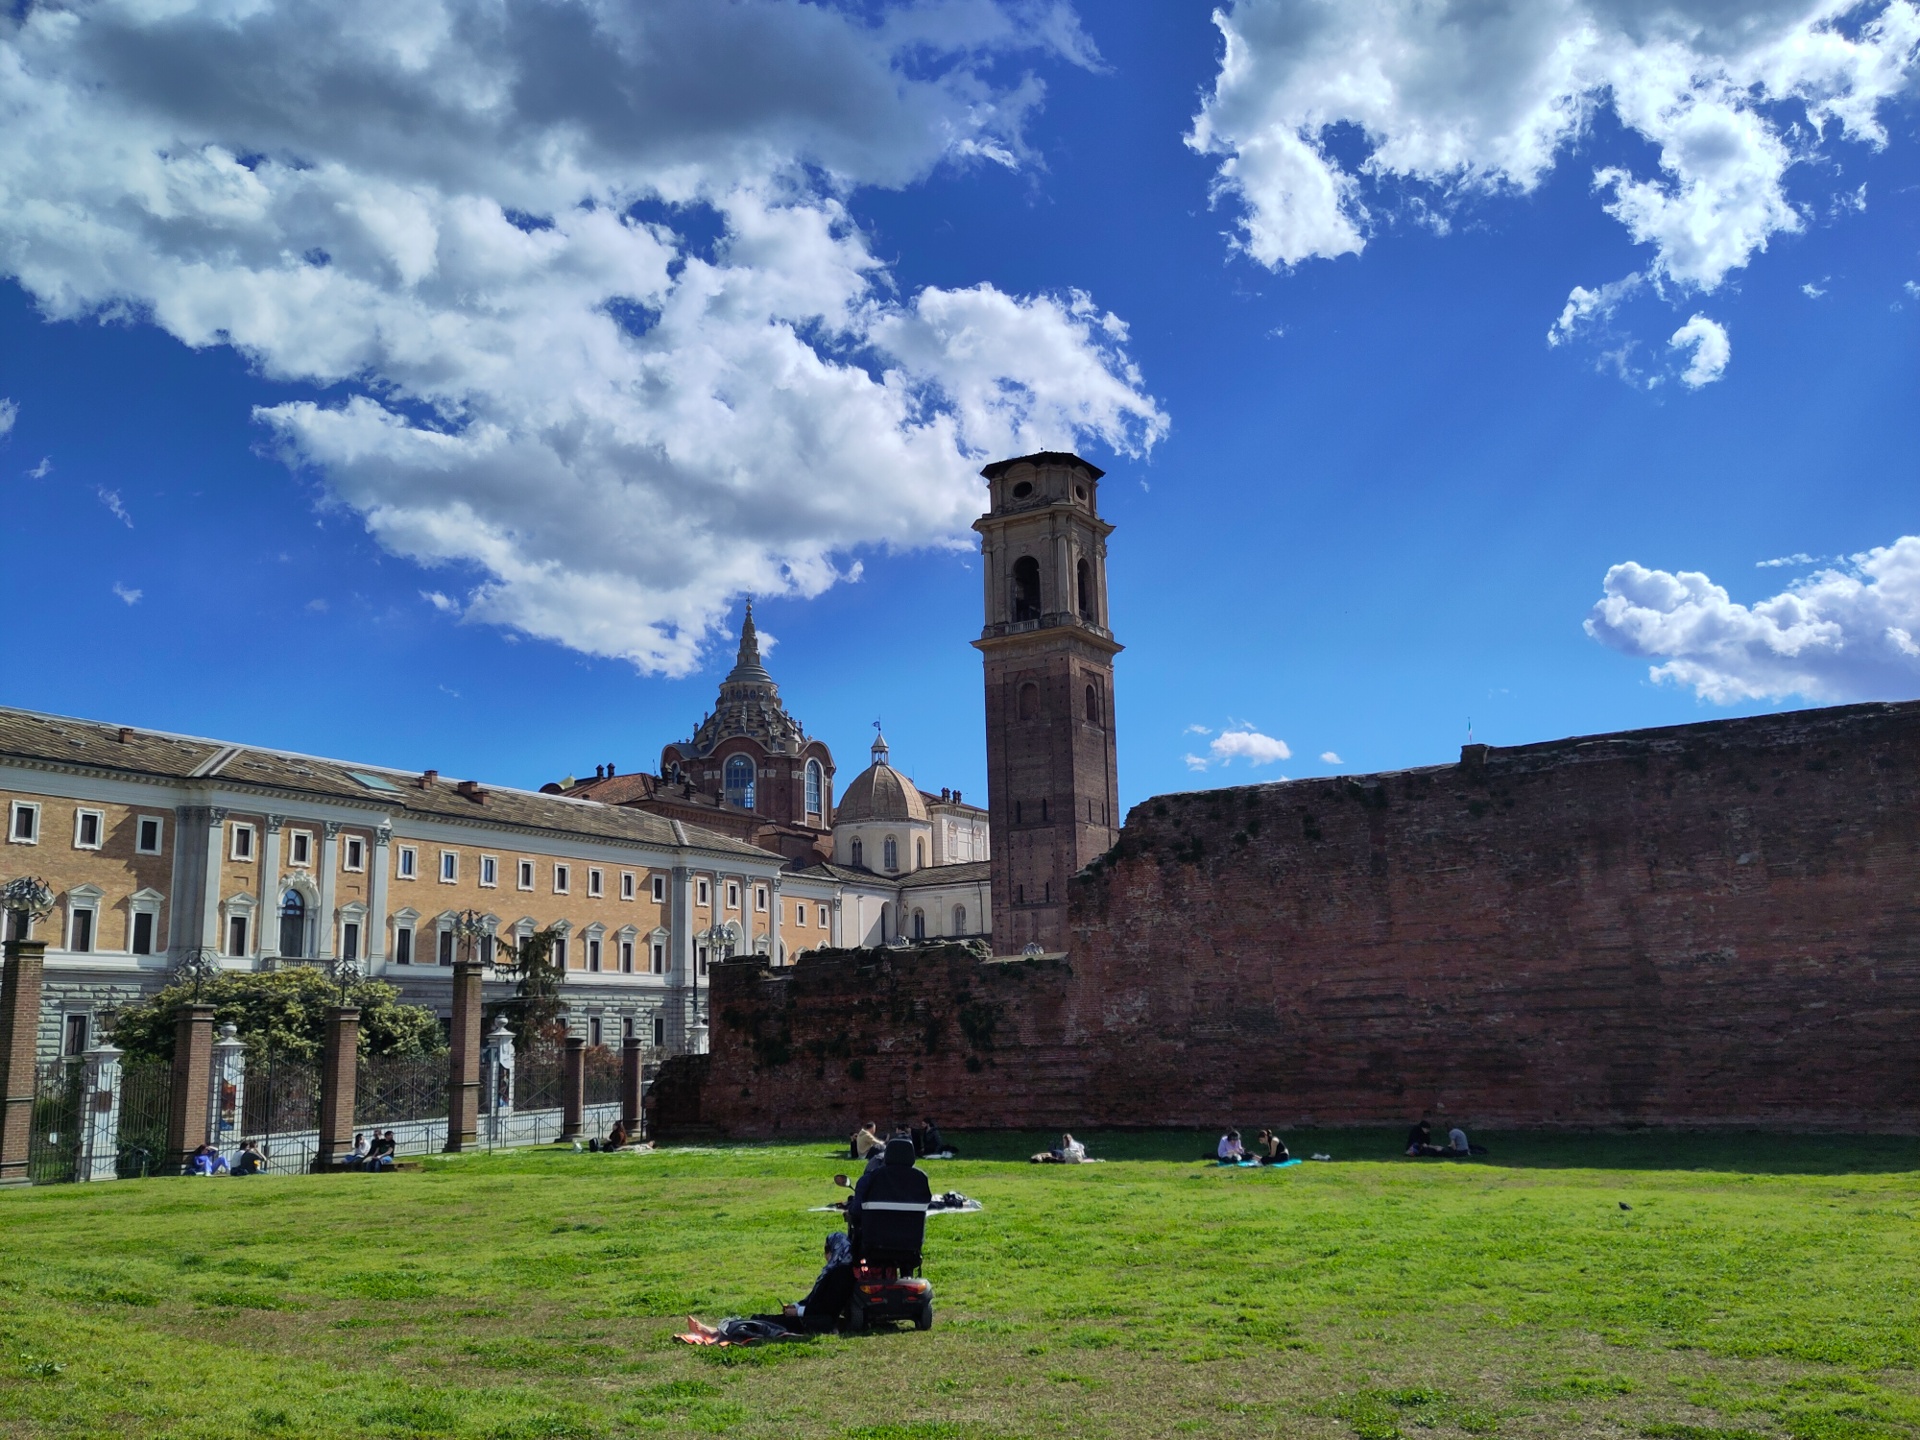 An extremely sunny park. A couple, a man in a wheelchair and a woman wearing a hijab, is enjoying the sun on the grass. Further out, the Palatine door, a tower and a church.